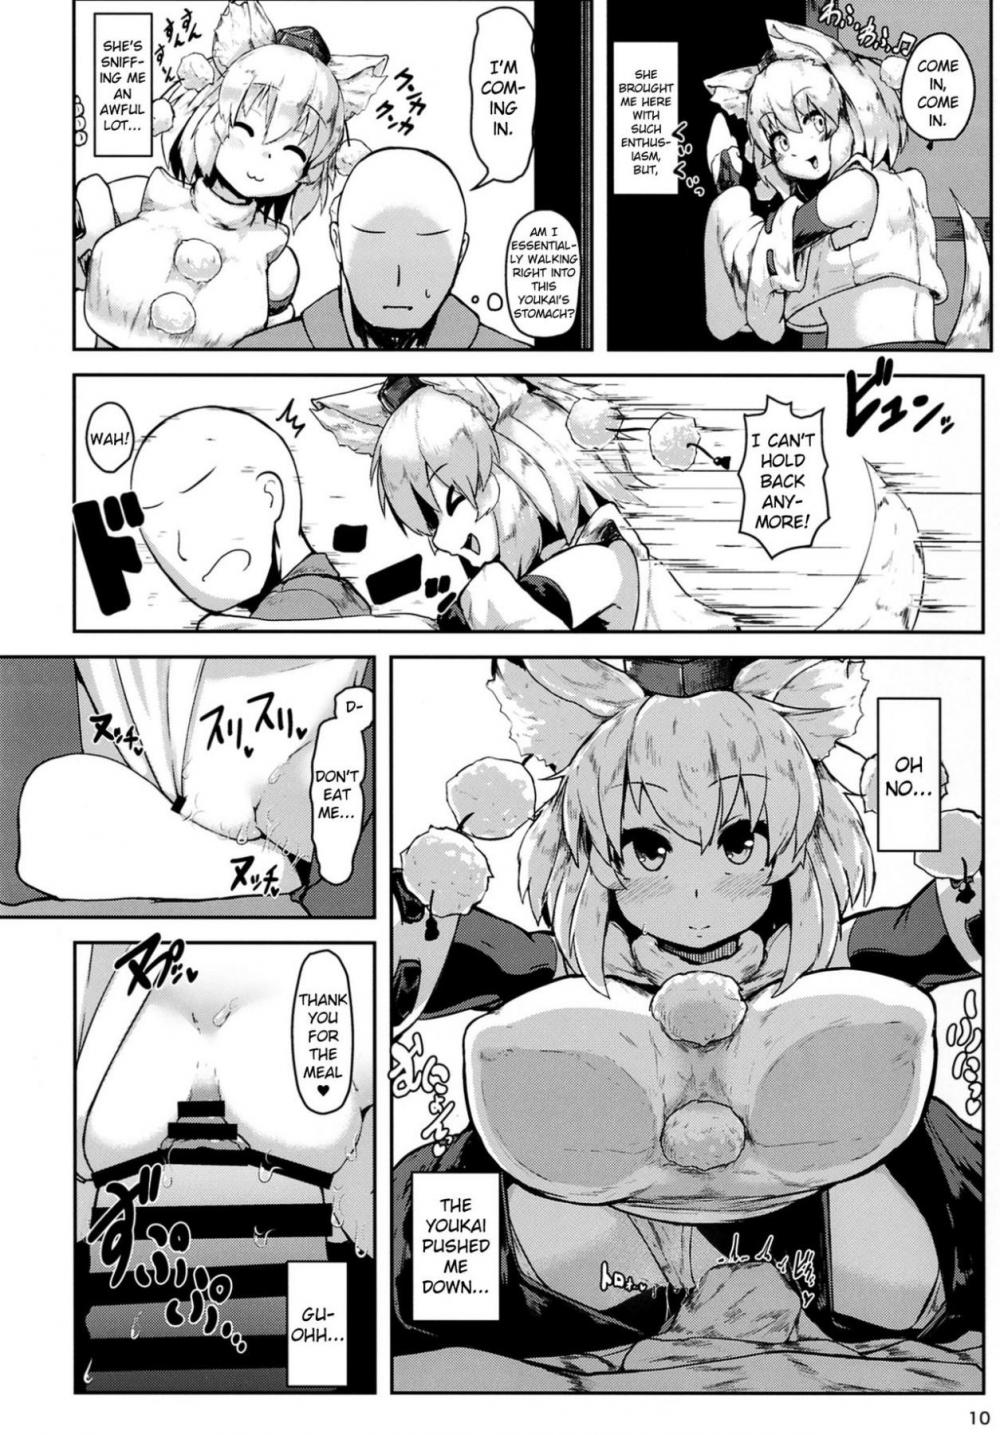 Nopelsex - Read Busty Momiji Touhou hentai images new hentai manga dbz nude - Page: 9  - Online porn video at mobile